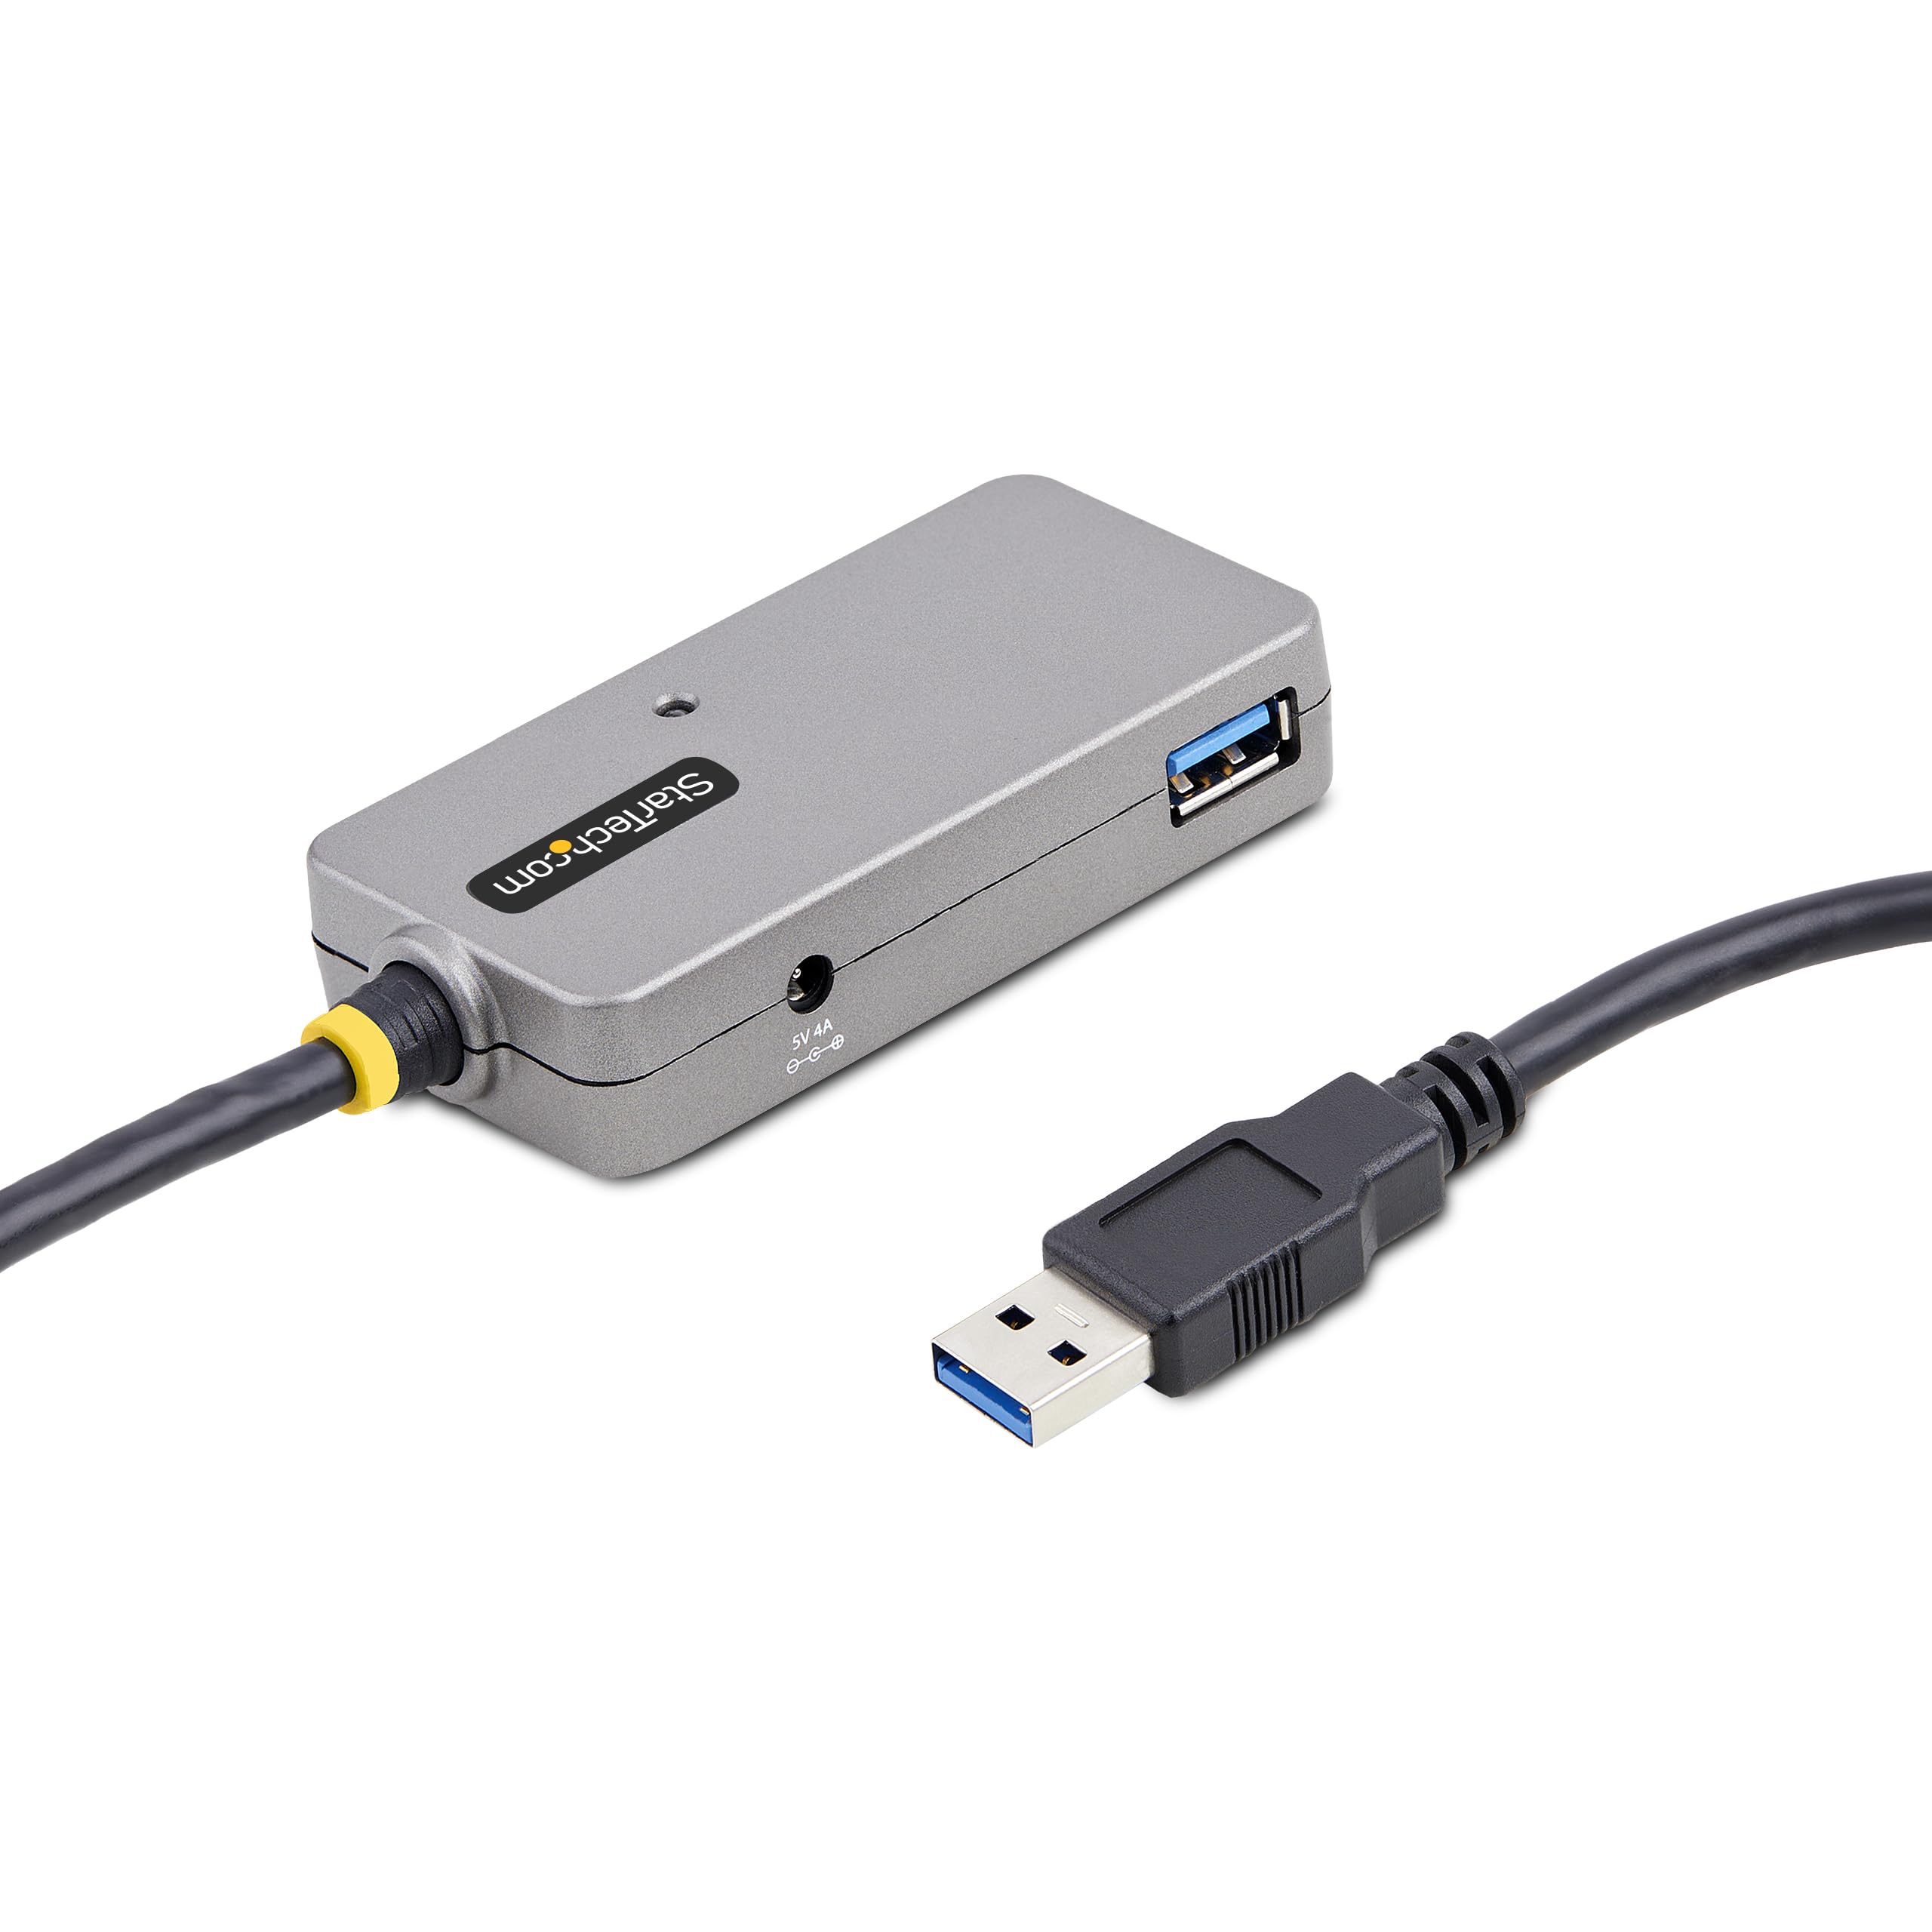 StarTech.com USB Extender Hub, 10m USB 3.0 Extension Cable w/ 4-Port USB-A Hub, Active/Bus Powered USB Repeater Cable, Optional 20W Power Supply Included, Level 2 ESD Protection (U01043-USB-EXTENDER)